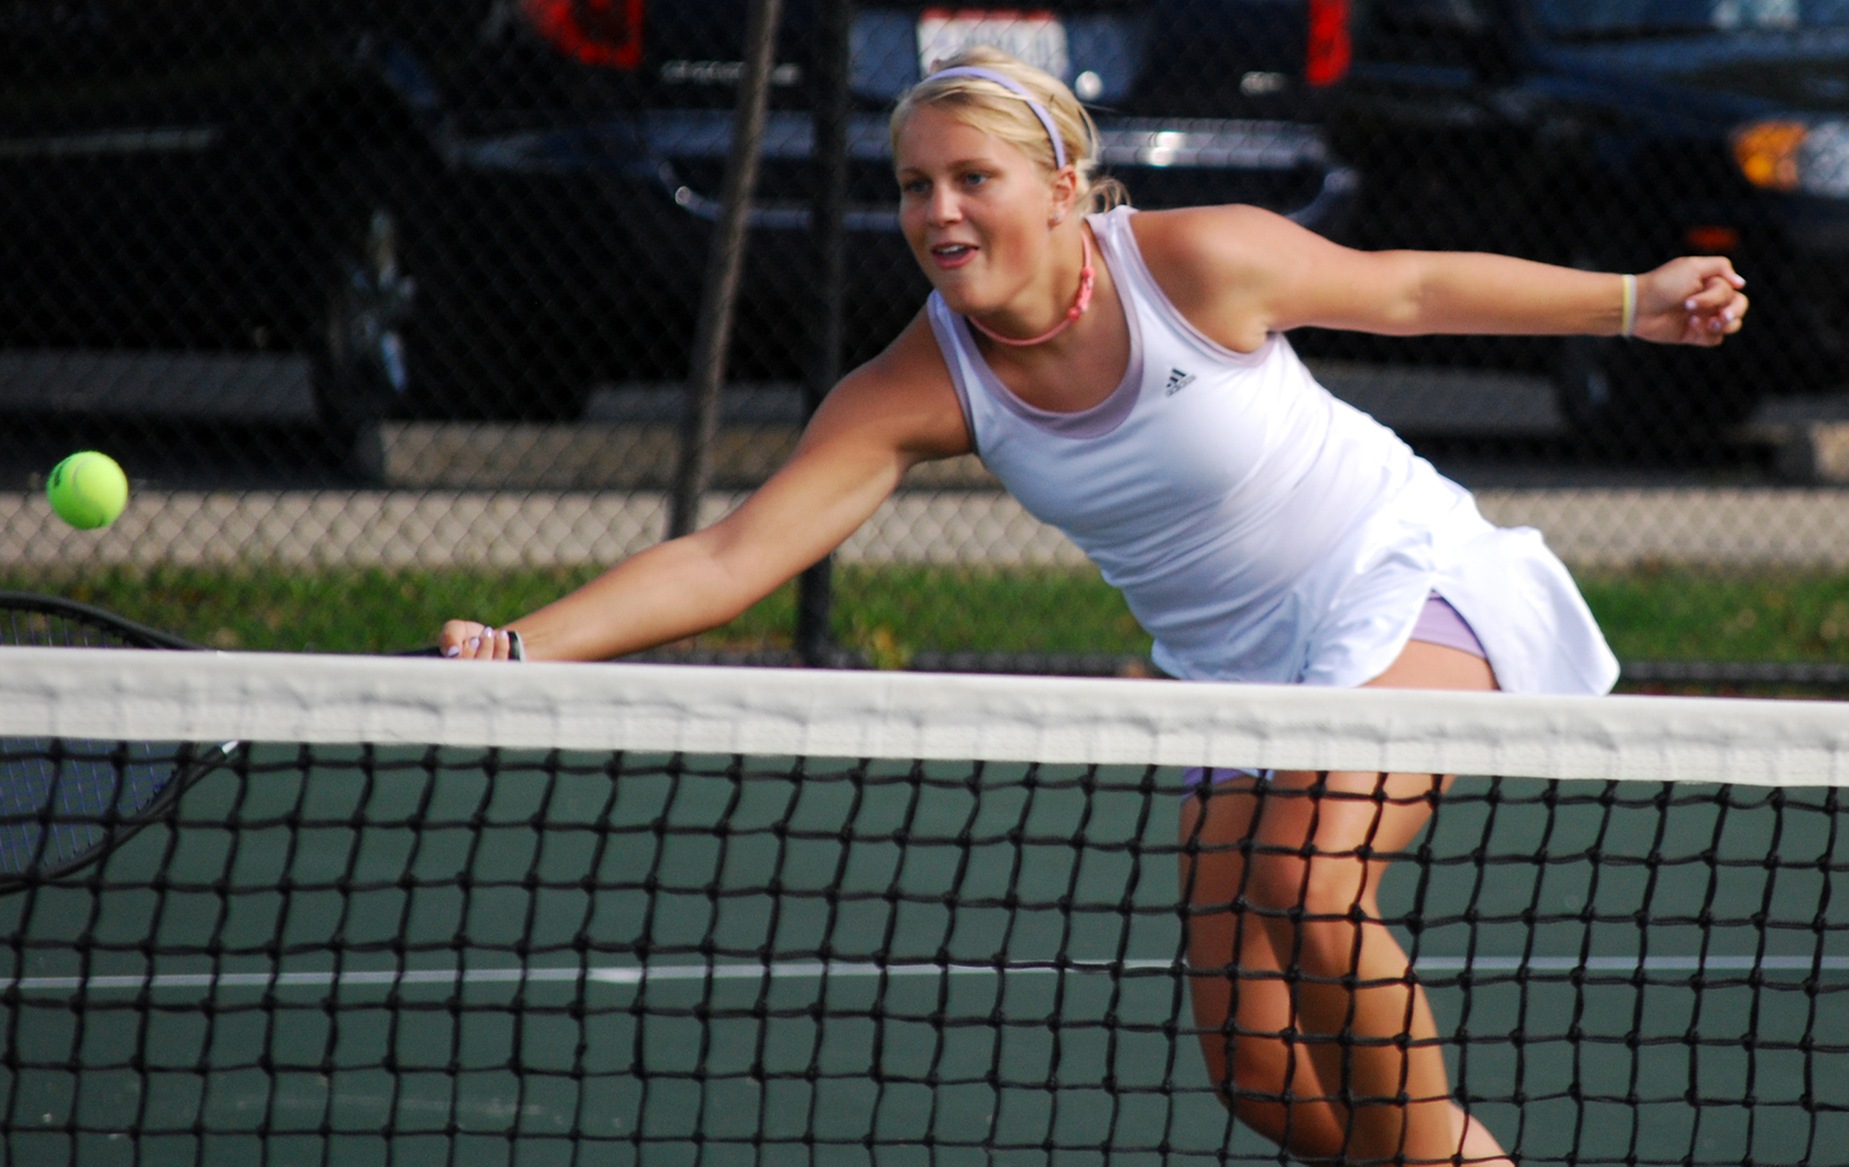 DC Drops HCAC Tri-Match with Bluffton and Rose-Hulman